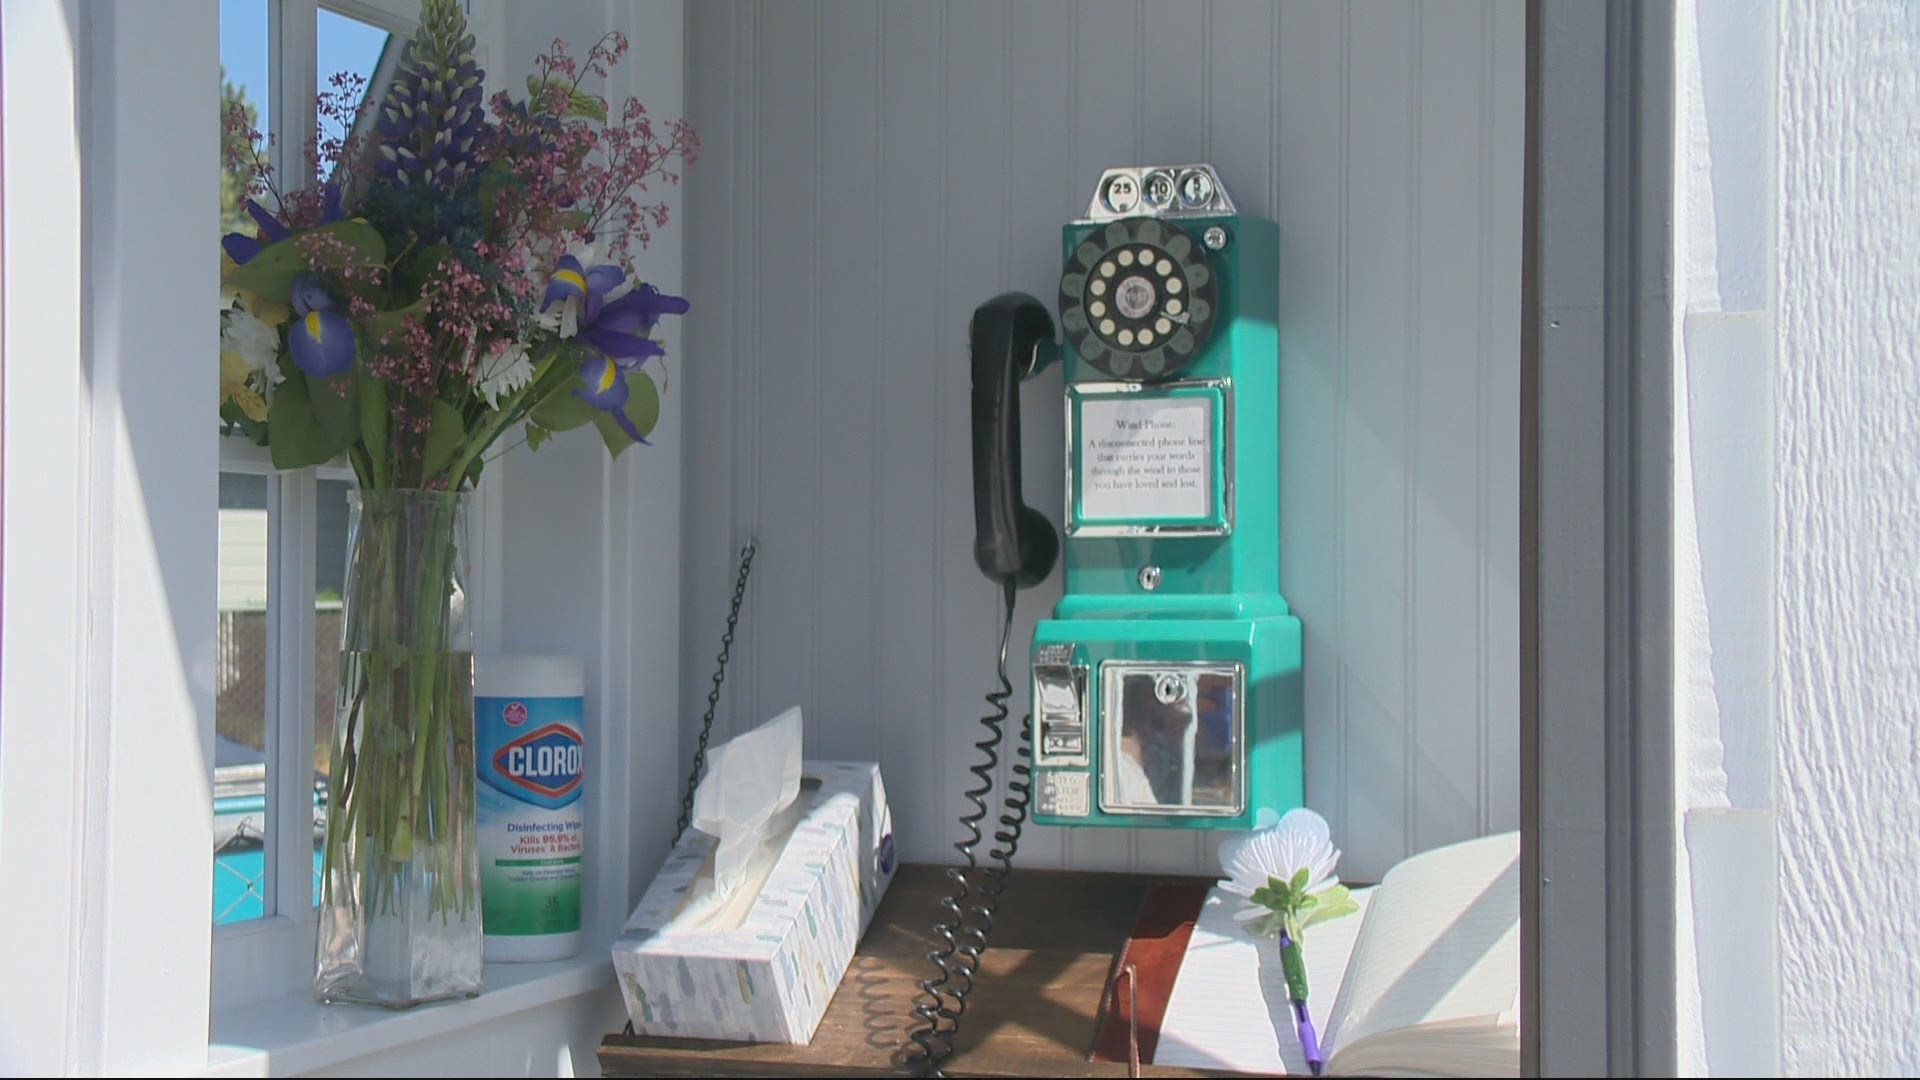 Inspired by a Japanese concept, the wind phone helps people connect with deceased loved ones; the booth is open to the public